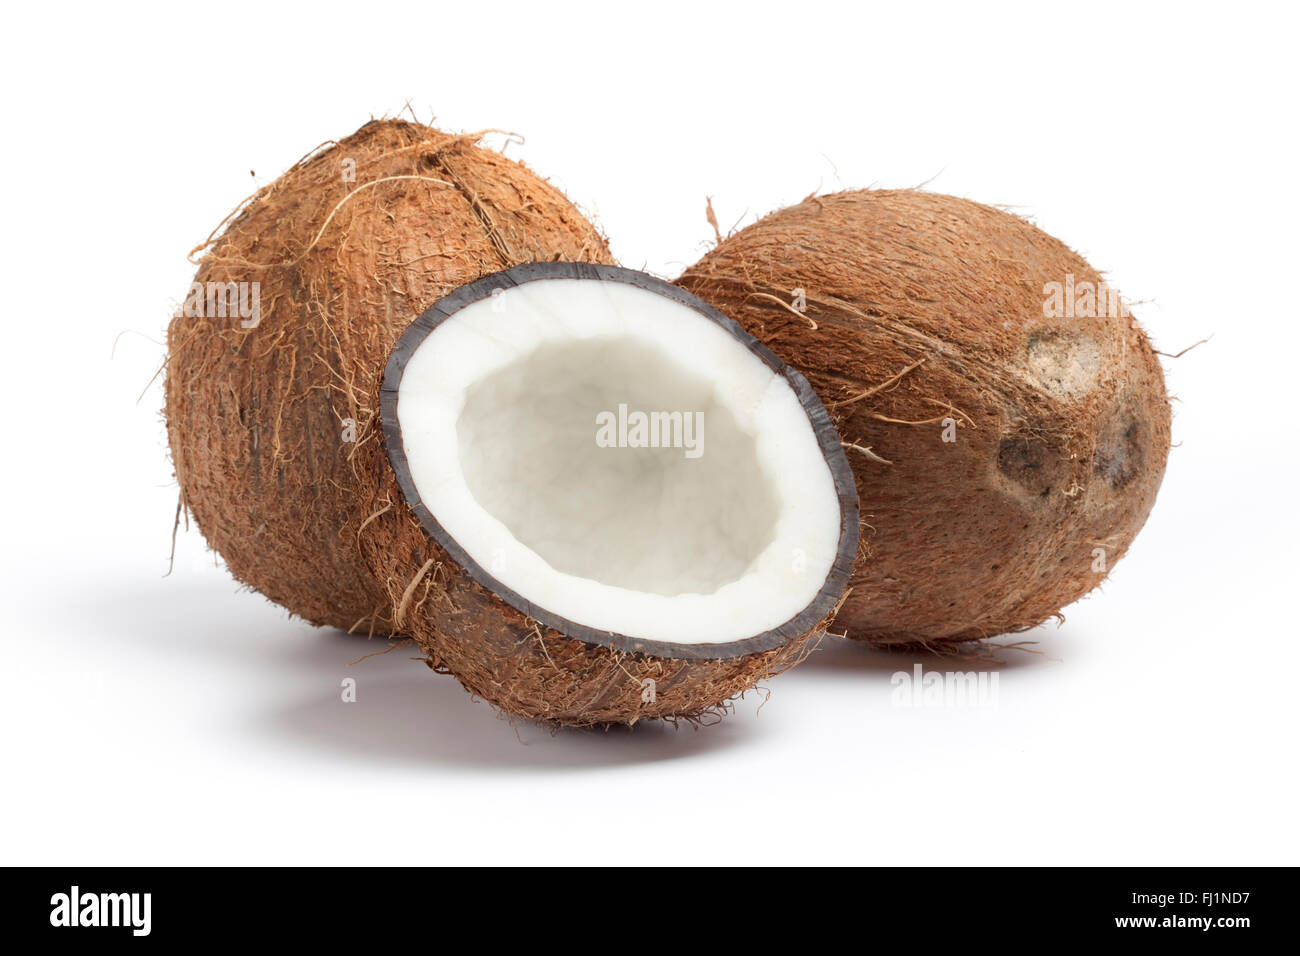 Whole and half fresh coconut isolated on white background Stock Photo